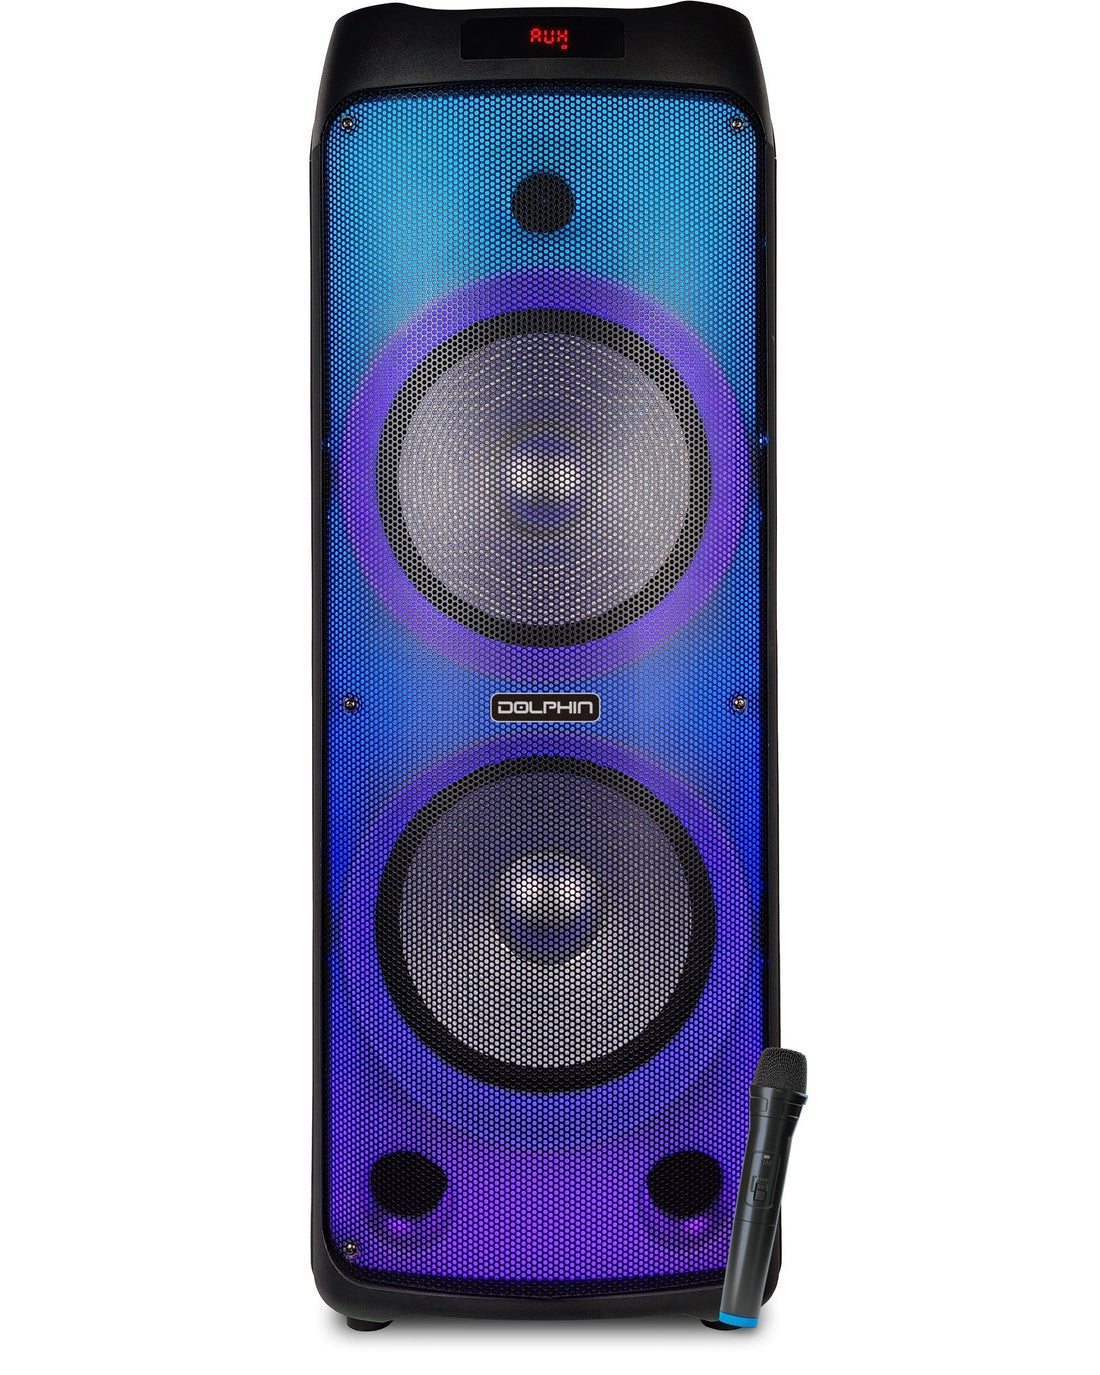 Dolphin SPF-1212R Powerful Sound &amp; BASS 5100W | Portable Rechargeable Big Party Speaker | Dual 12&quot;, 3X 1 Tweeters | LED Party Lights, Handles and Wheels, Includes 2X Mic &amp; Remote Control - Top ElectrosSpeakersSPF-1212R810059431263